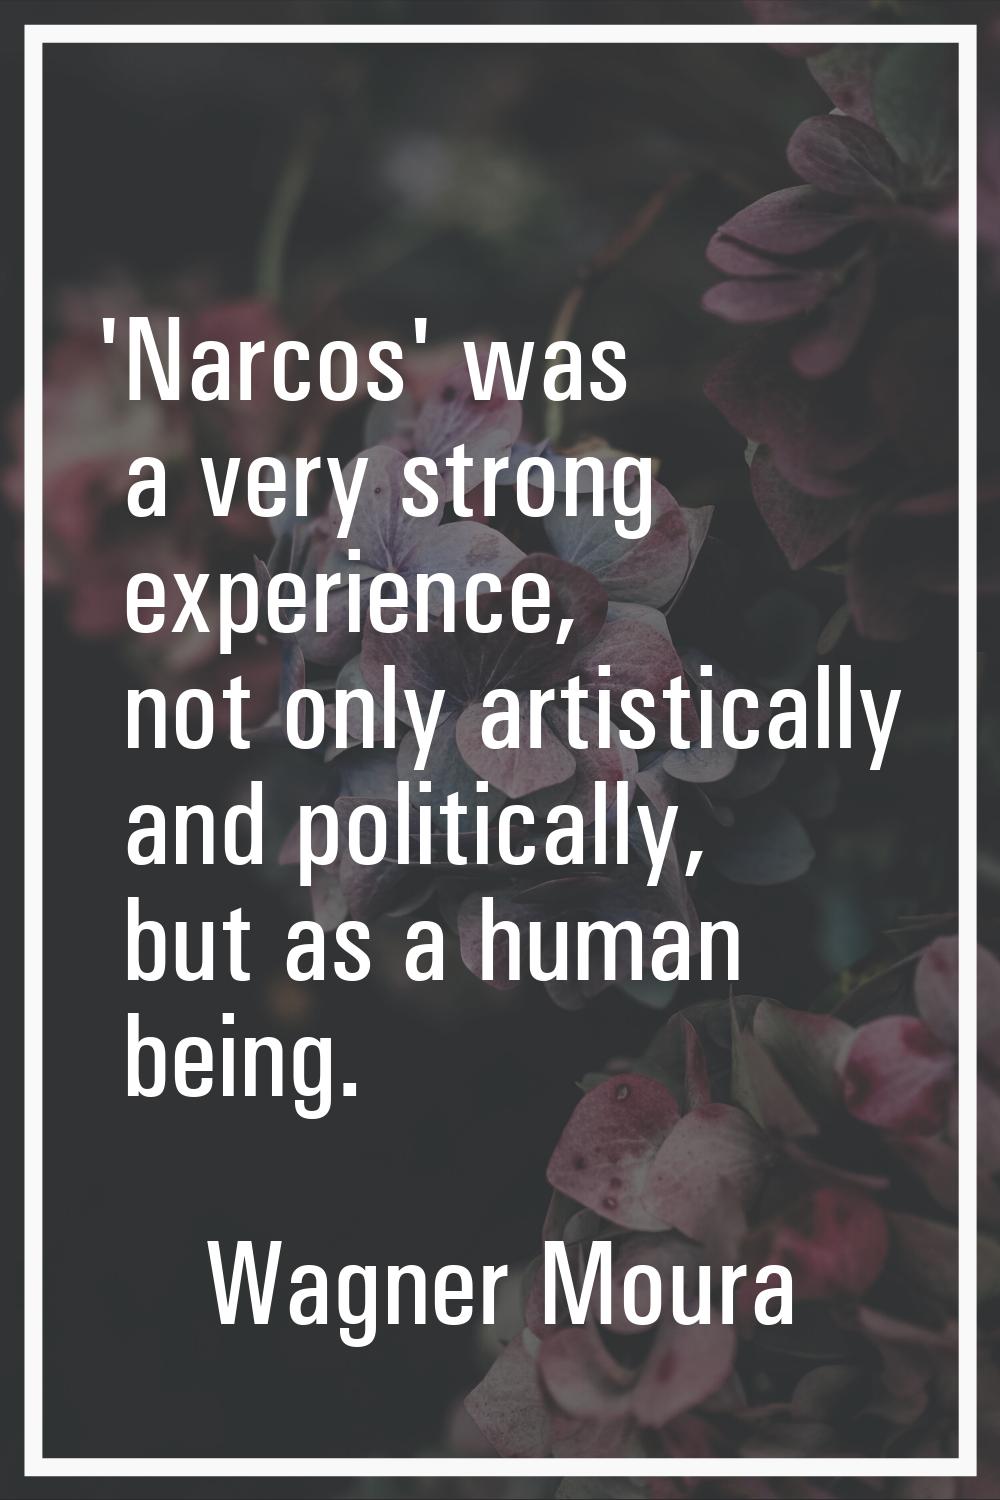 'Narcos' was a very strong experience, not only artistically and politically, but as a human being.